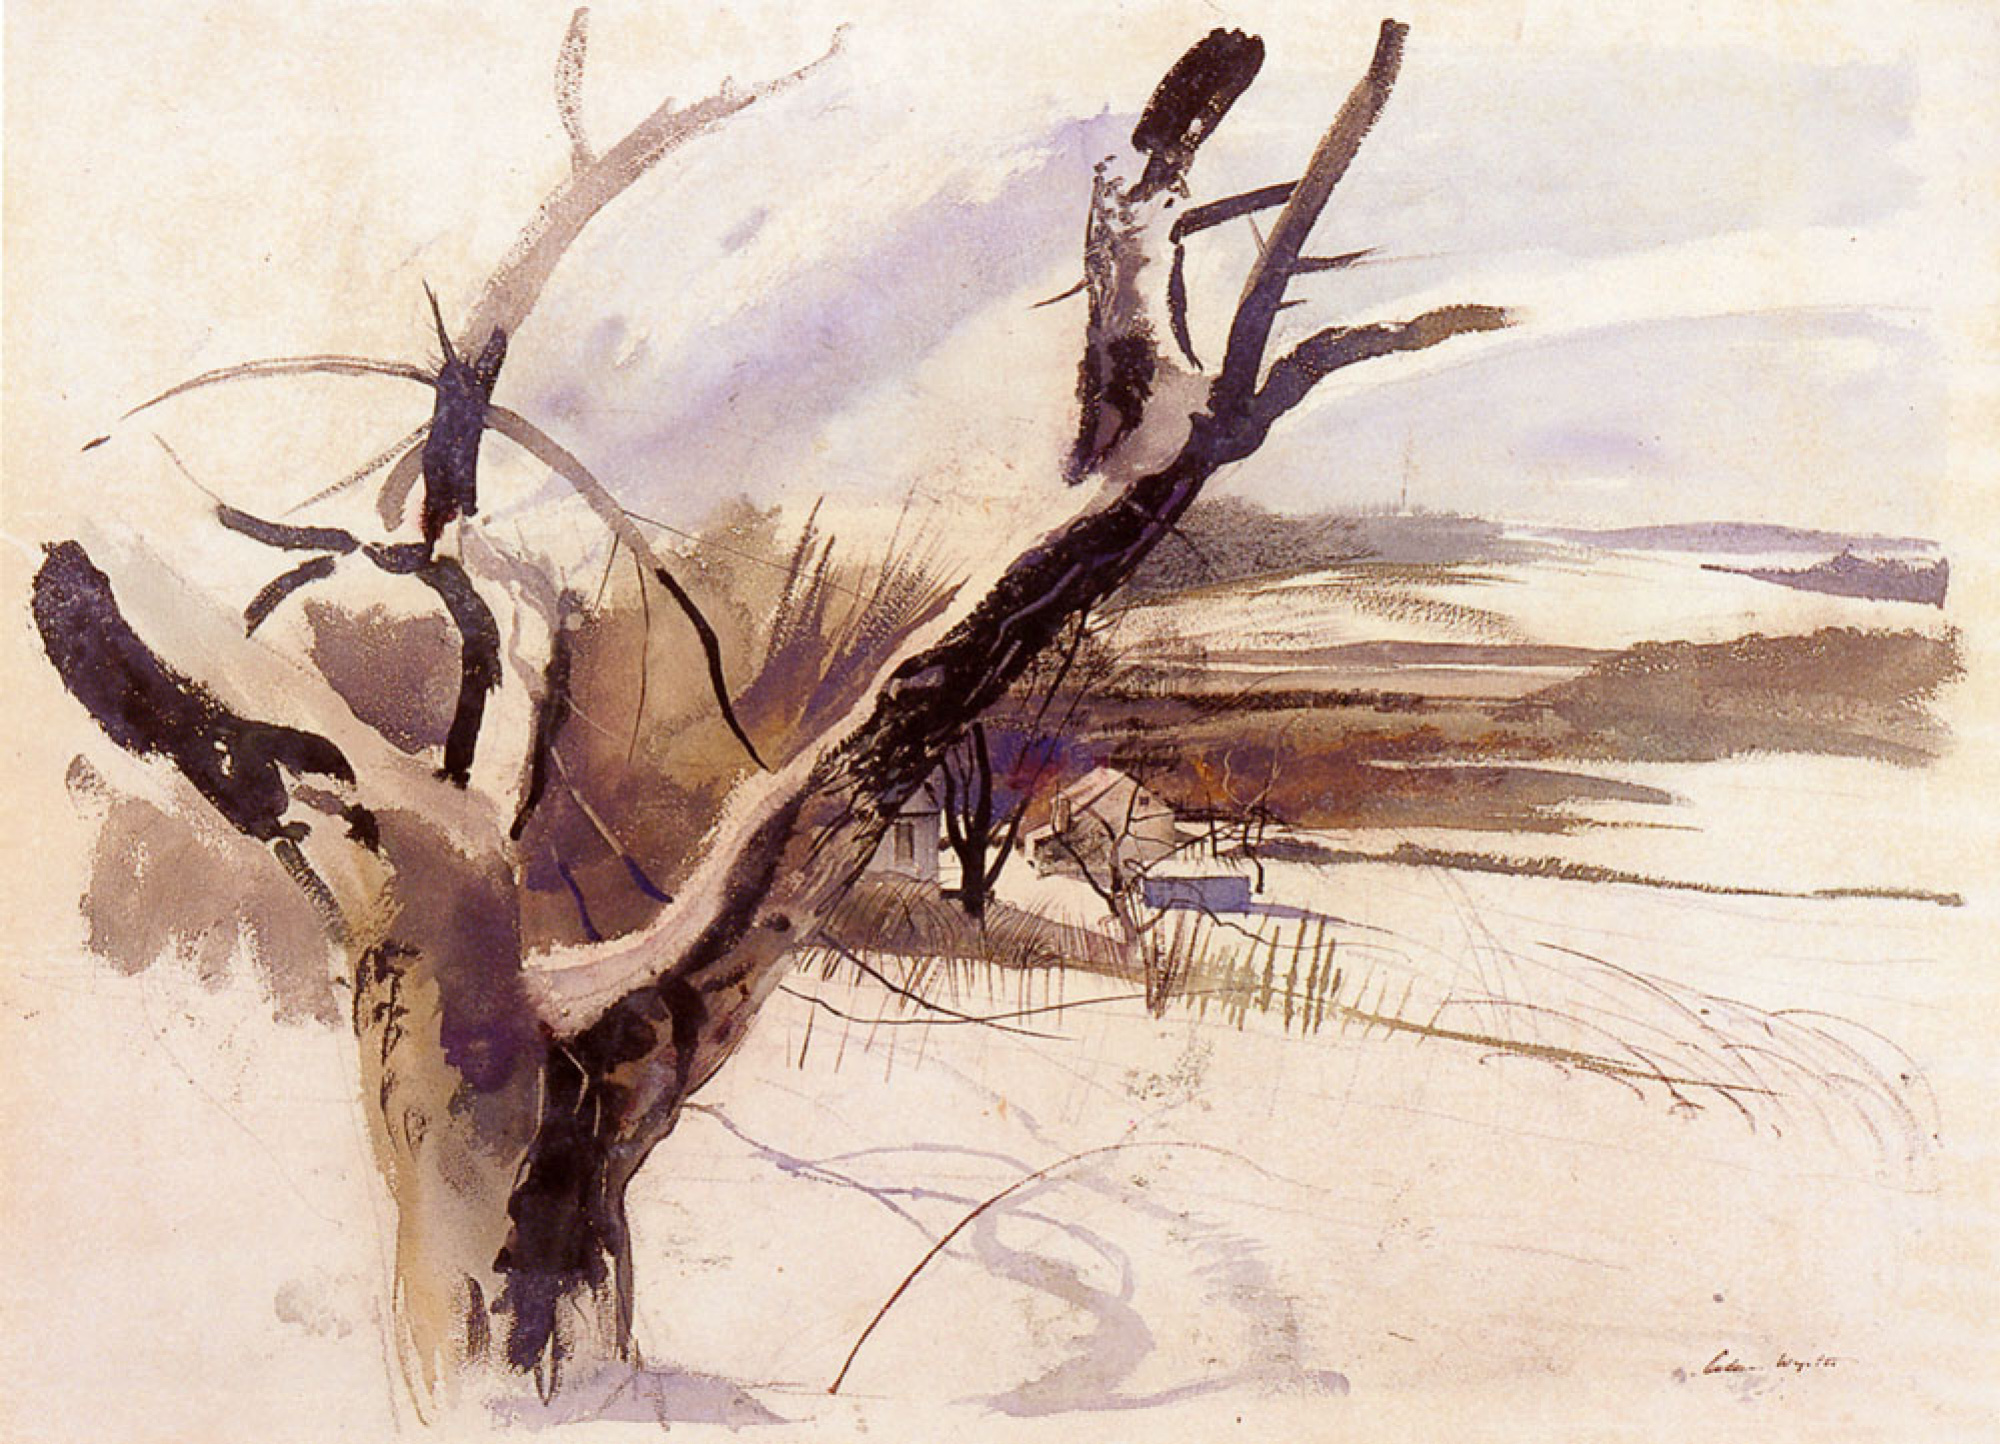 Works by Andrew Wyeth before 1940